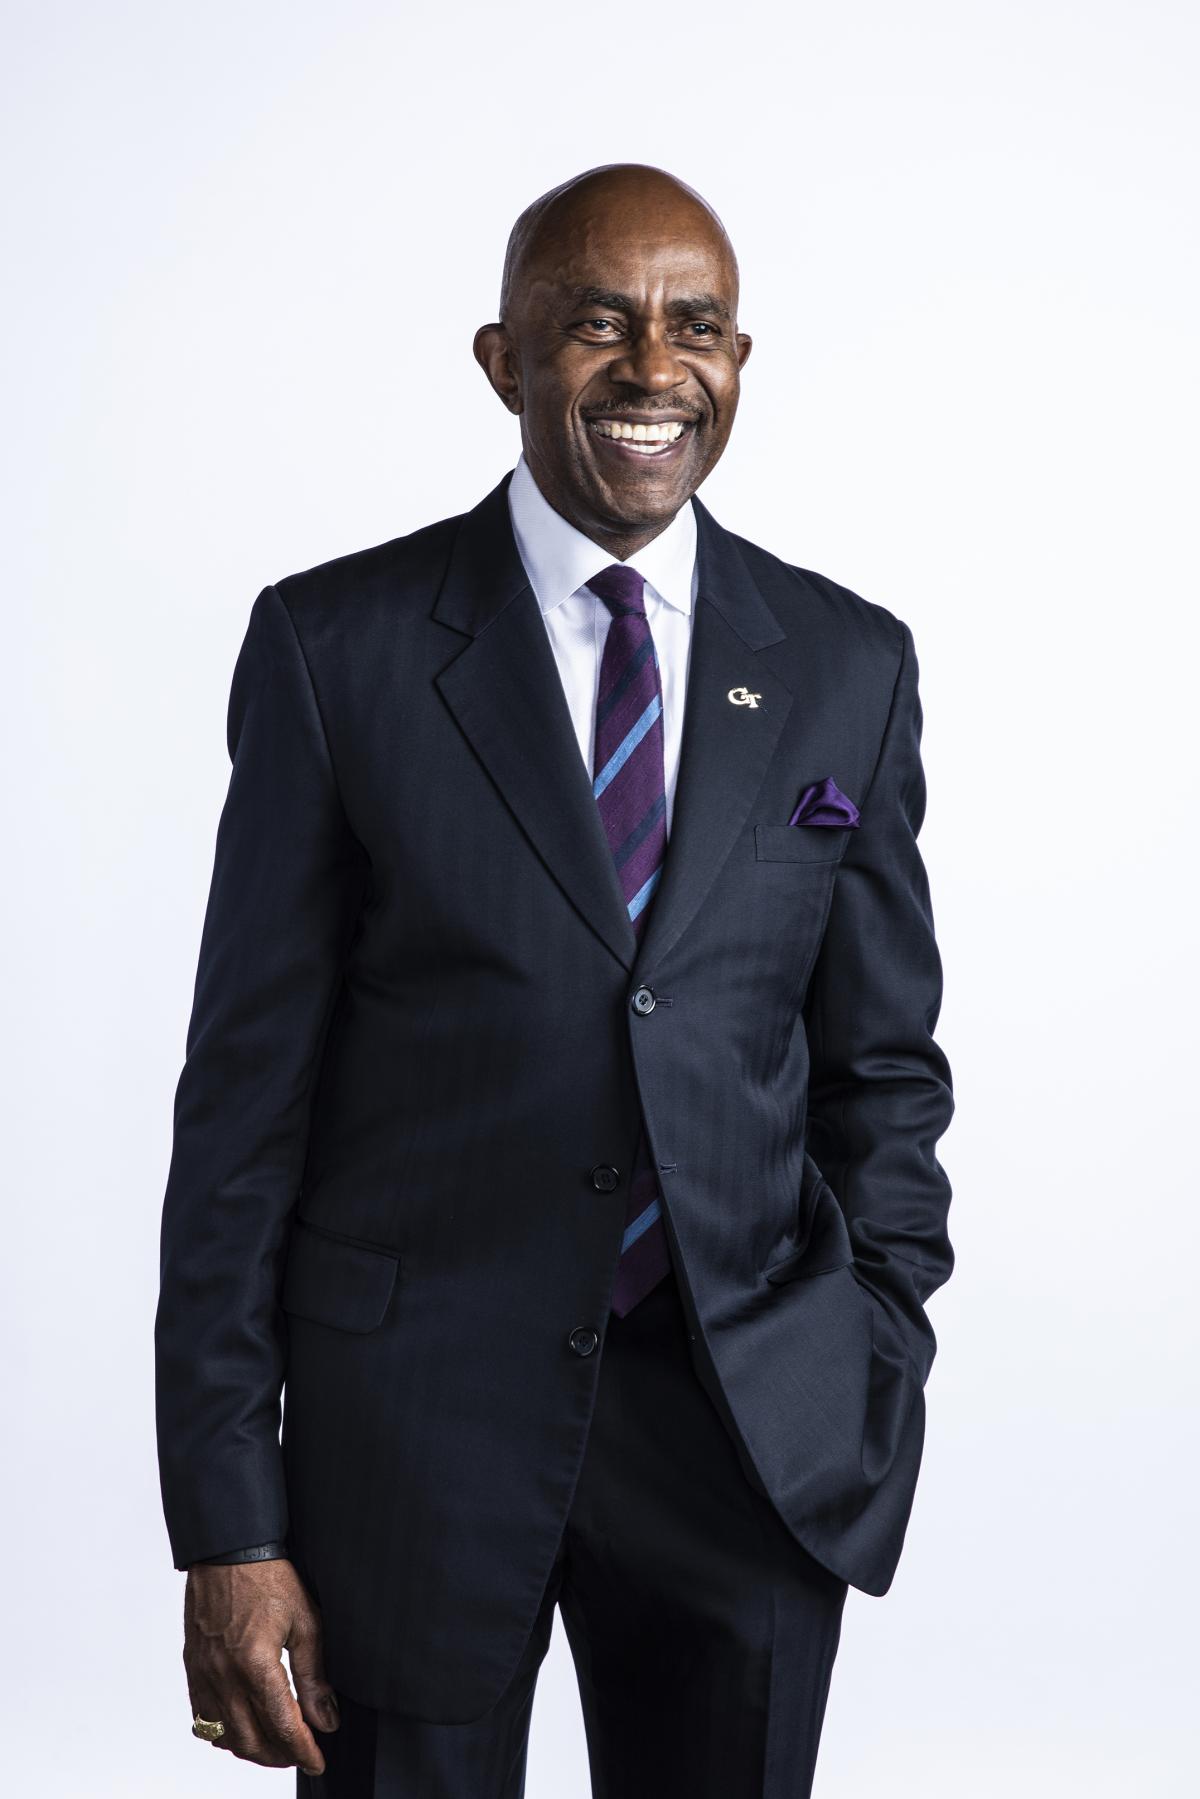 Ronald Johnson stands against a white background in suit and tie.